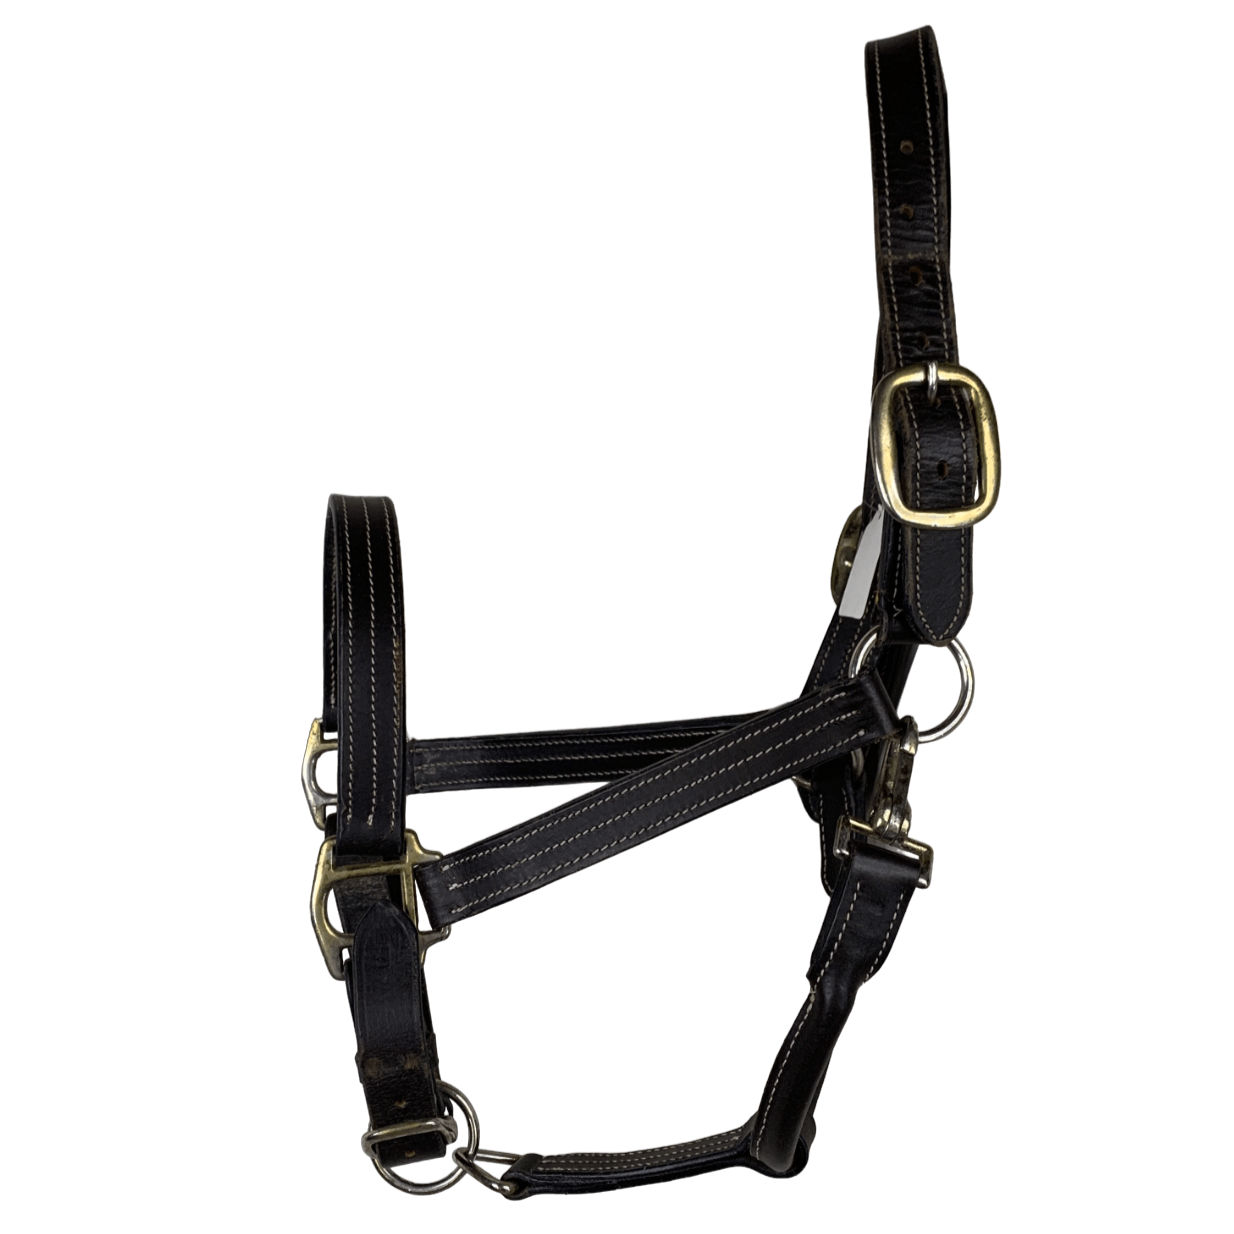 Triple Stitched Leather Halter